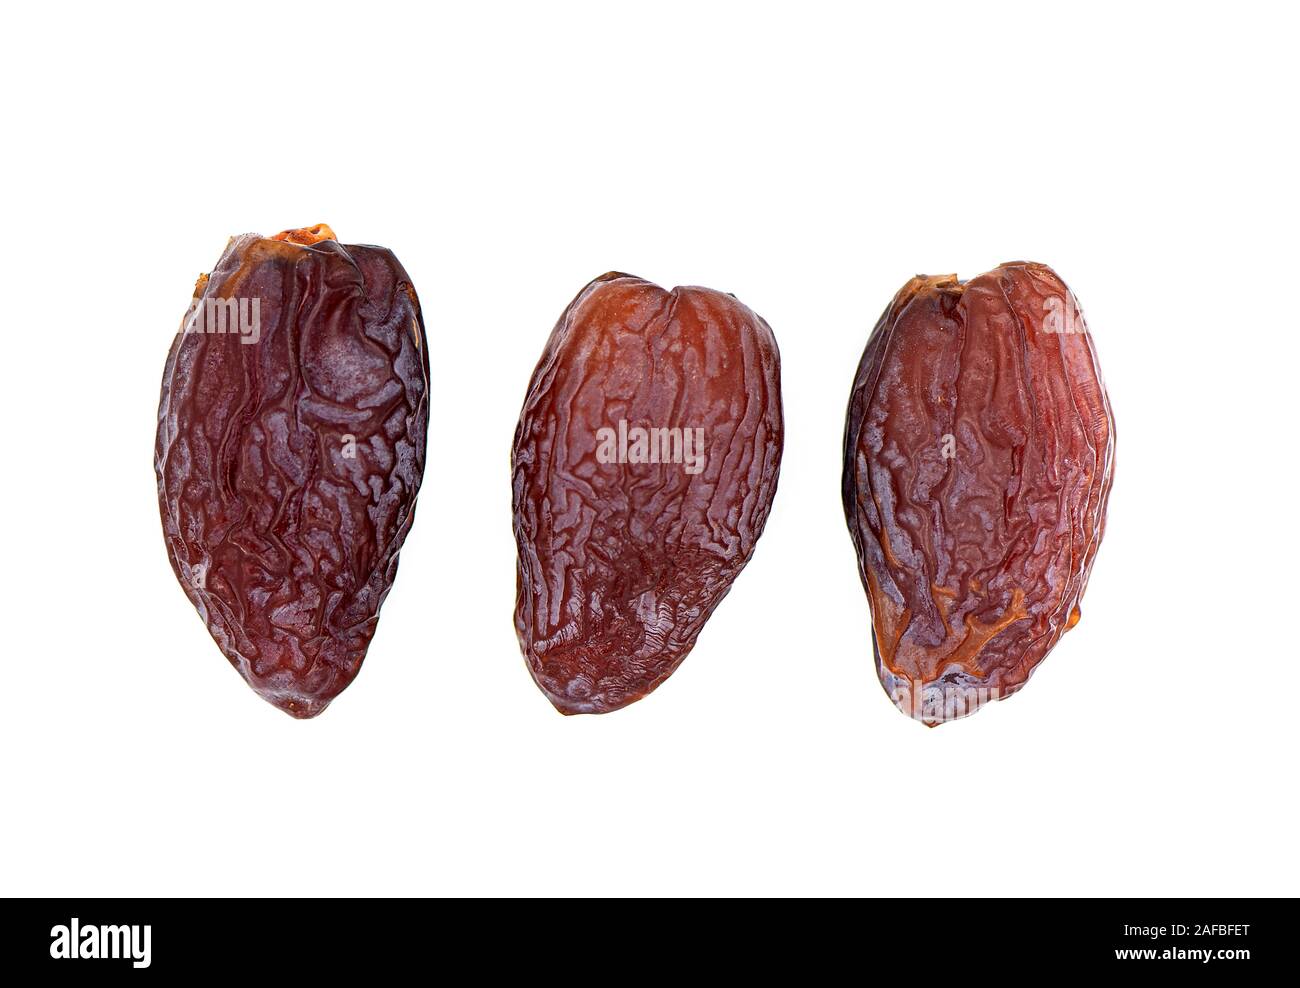 Date Fruit, Deglet Nour or King Date Fruit isolated on white Background Stock Photo